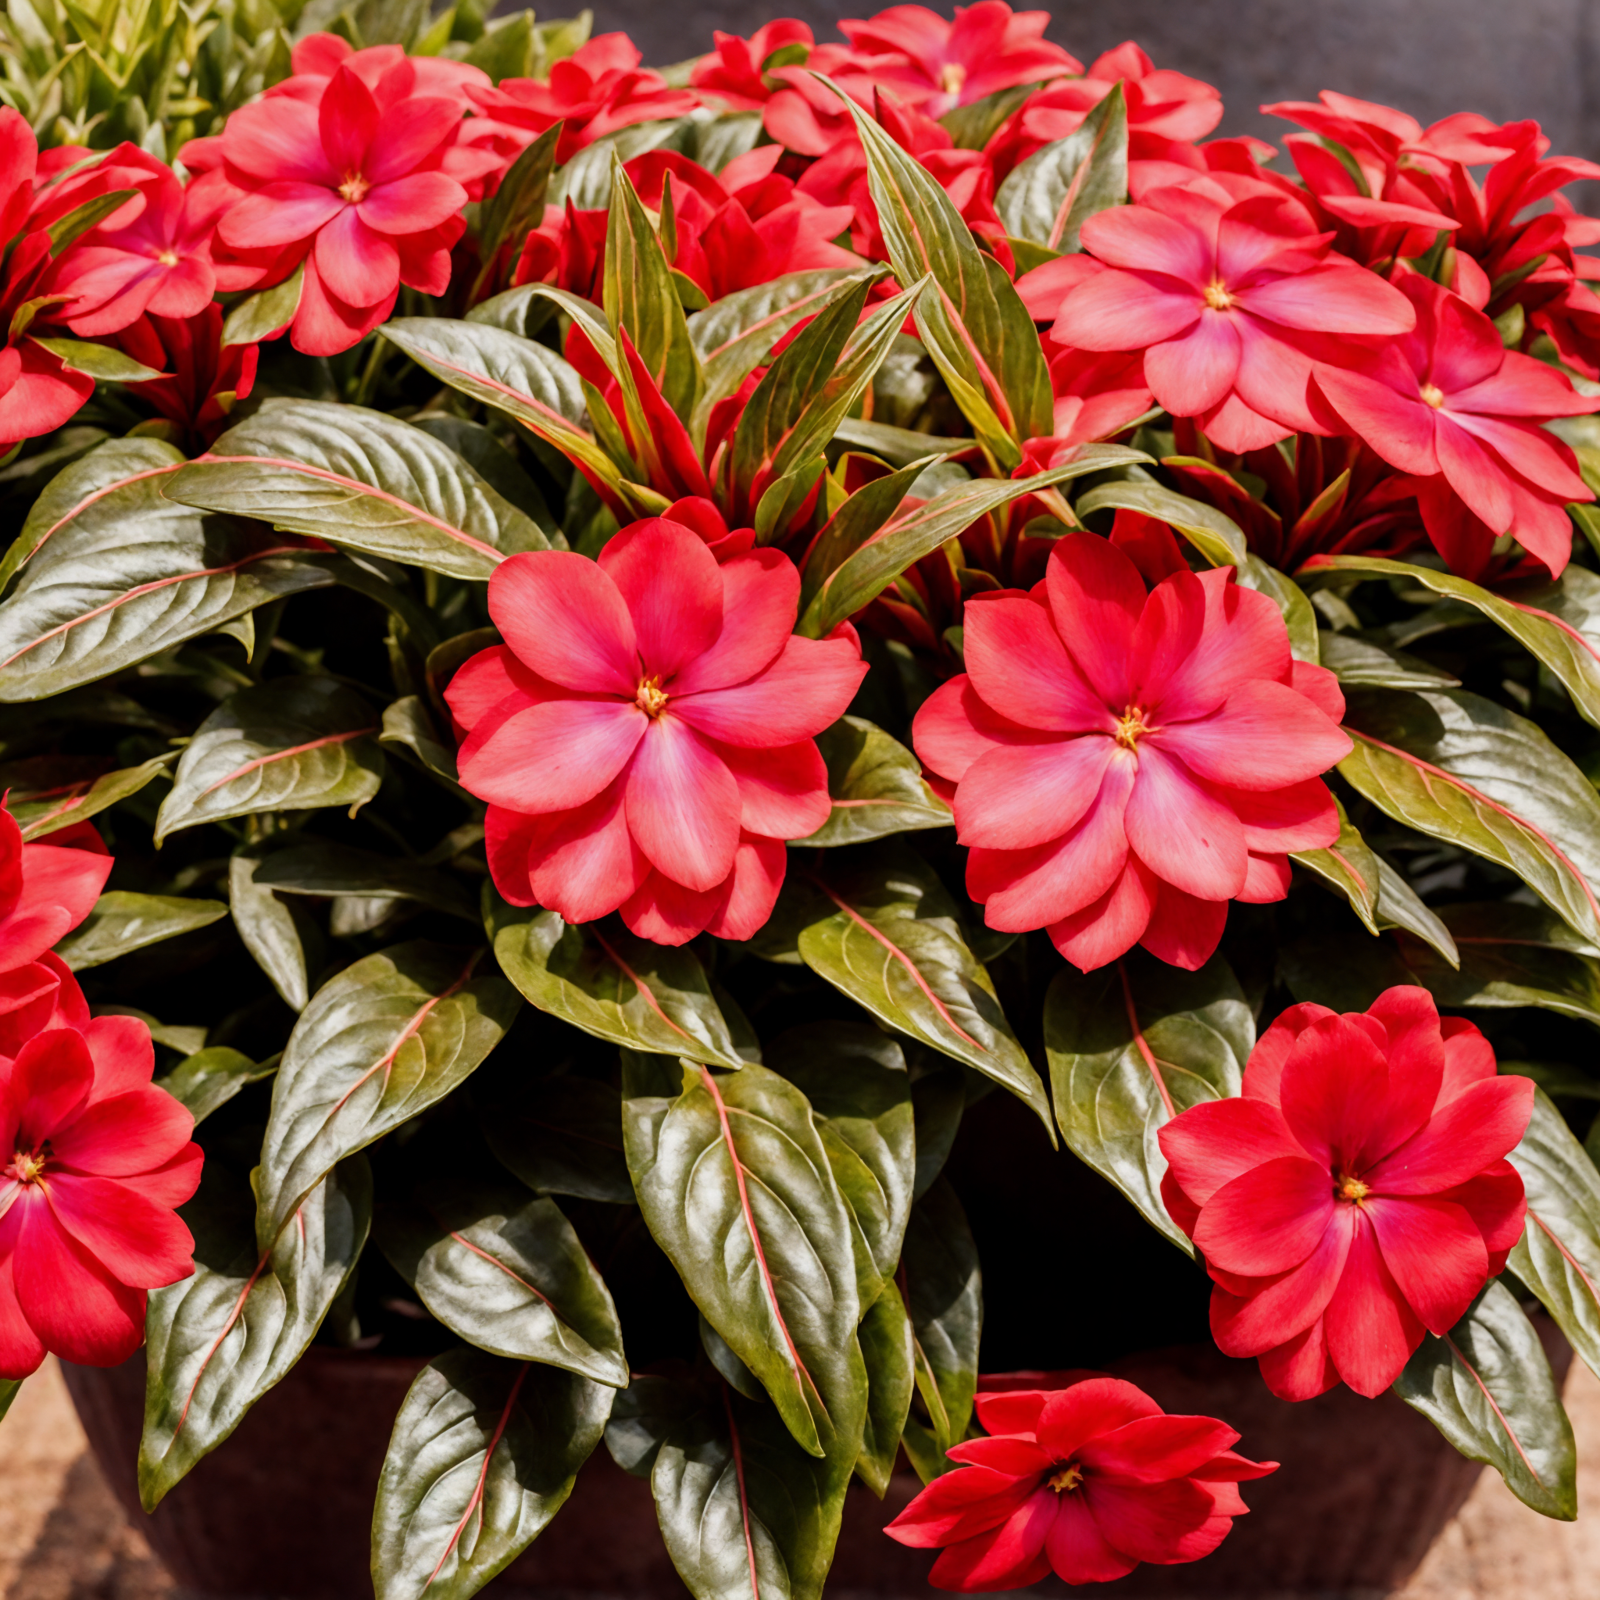 A cluster of vibrant red Impatiens hawkeri flowers in a planter, with clear lighting and a dark backdrop.